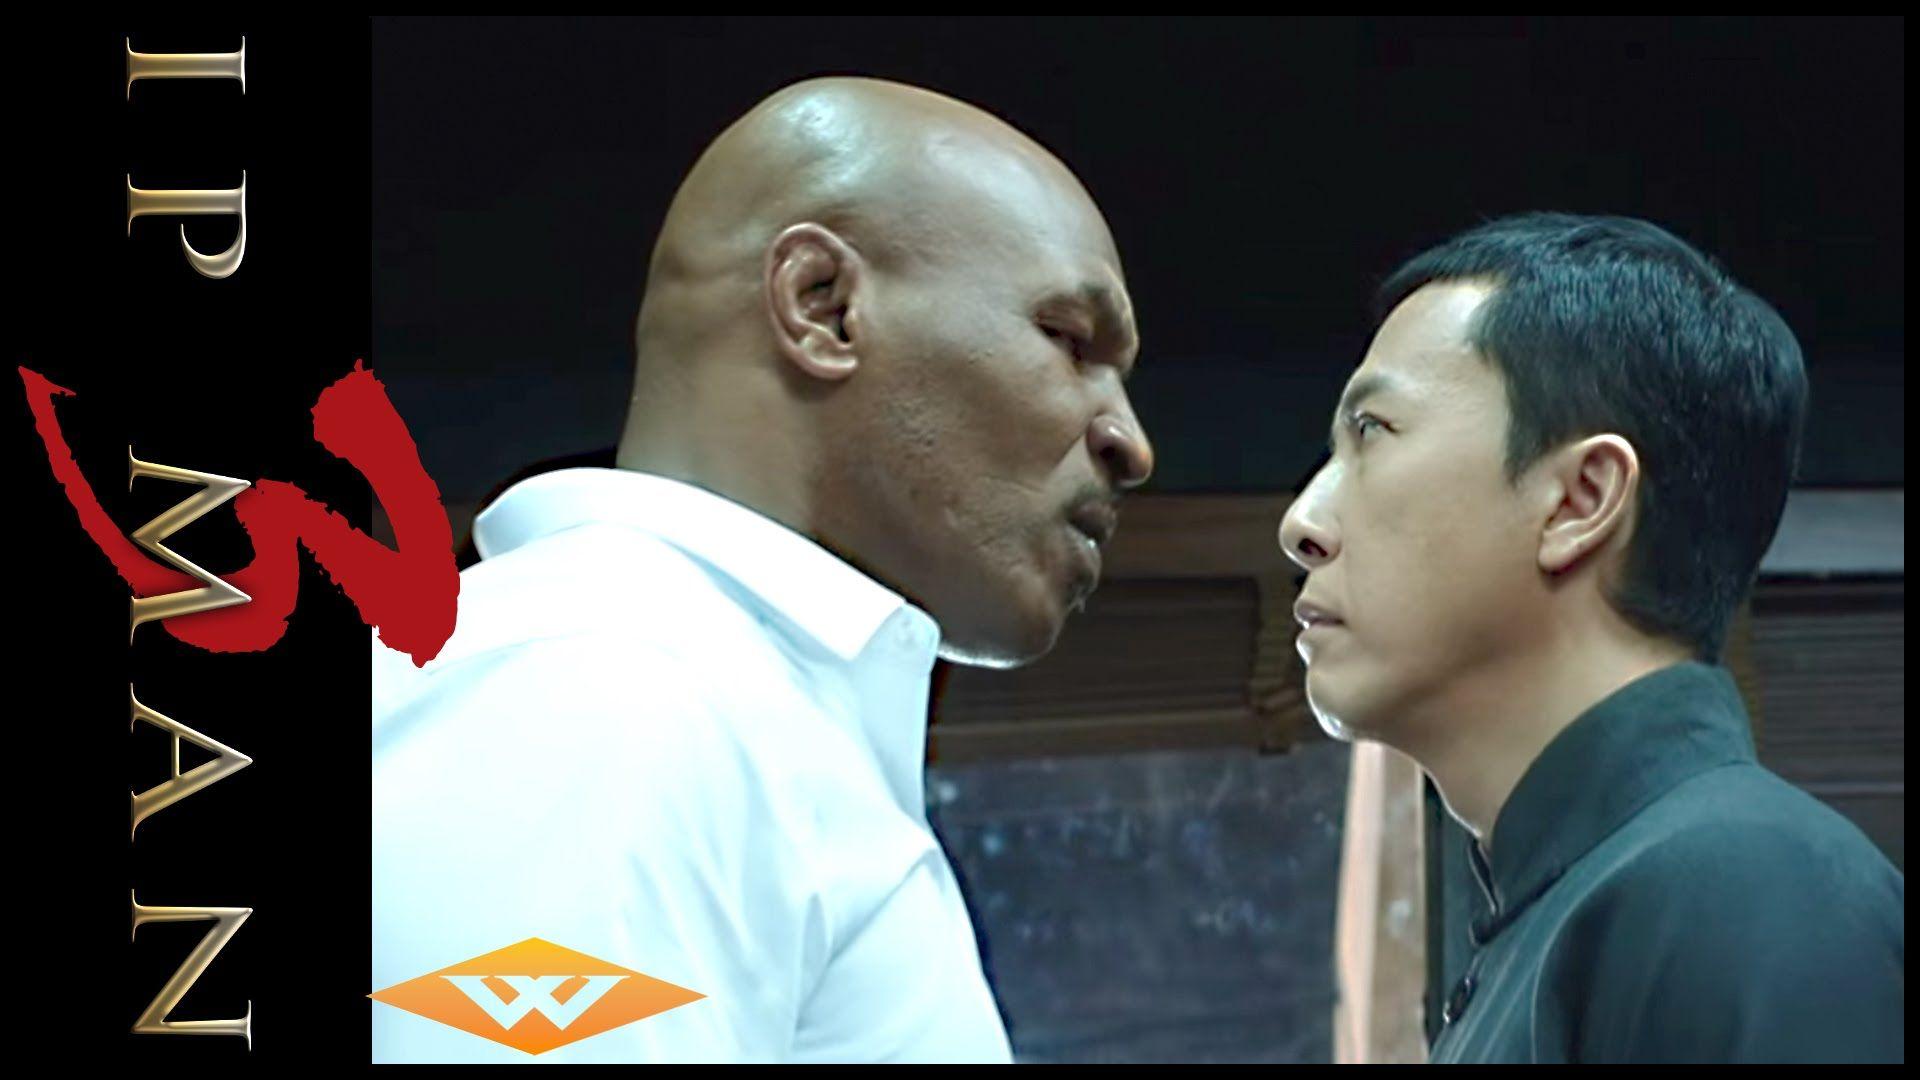 New Donnie Yen Ip Man Fight Scene Image To Download Wallpaper